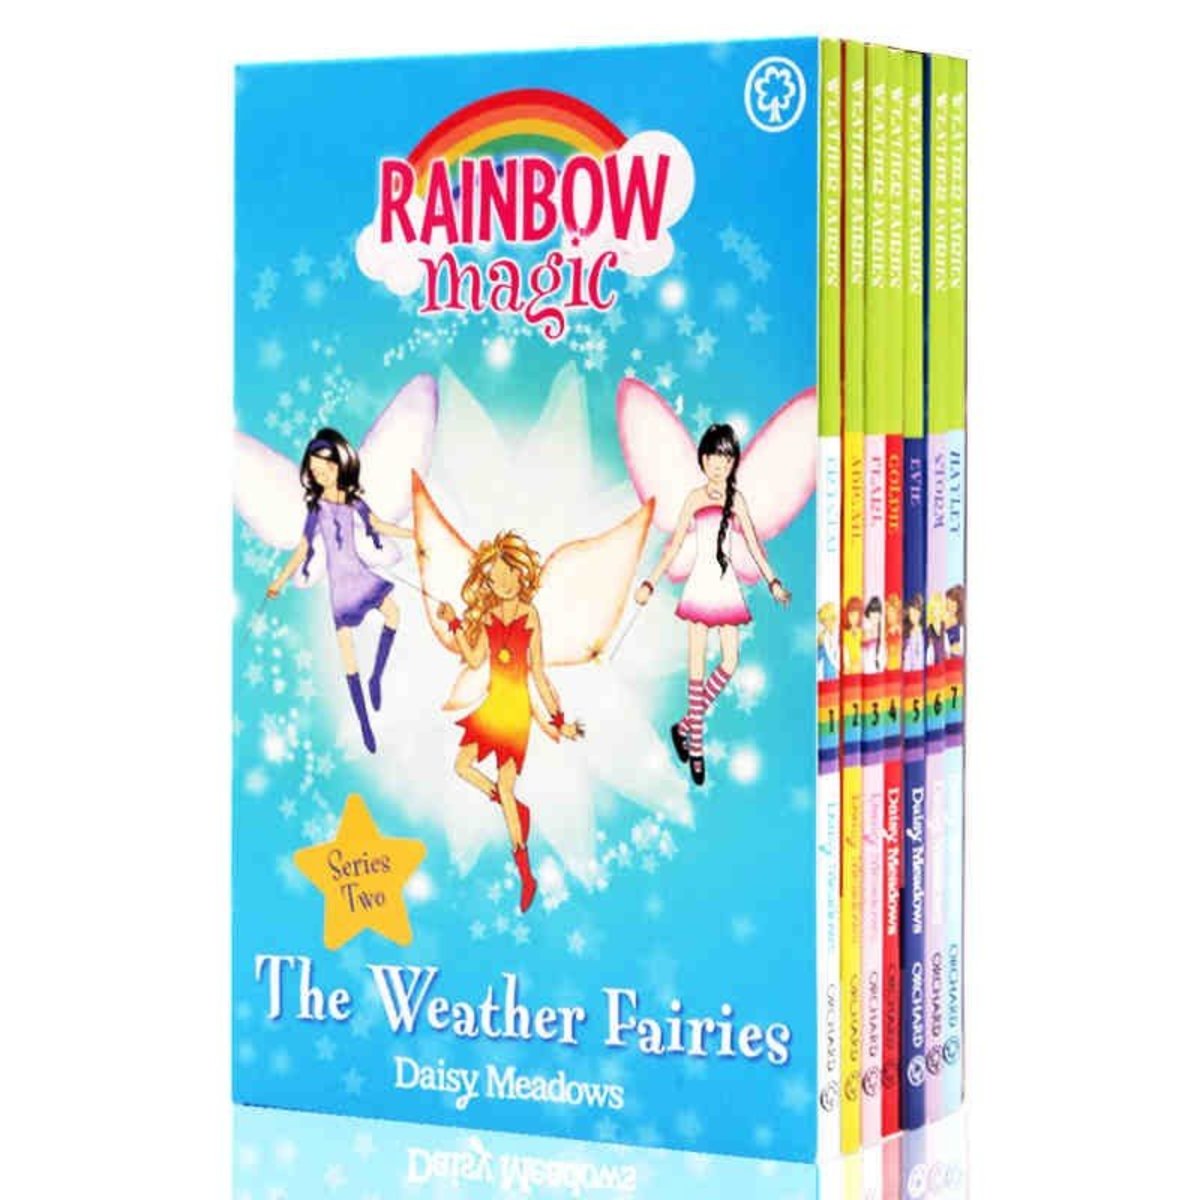 Orchard Books Rainbow Magic Series 2 The Weather Fairies Collection -7 Books No 8-14